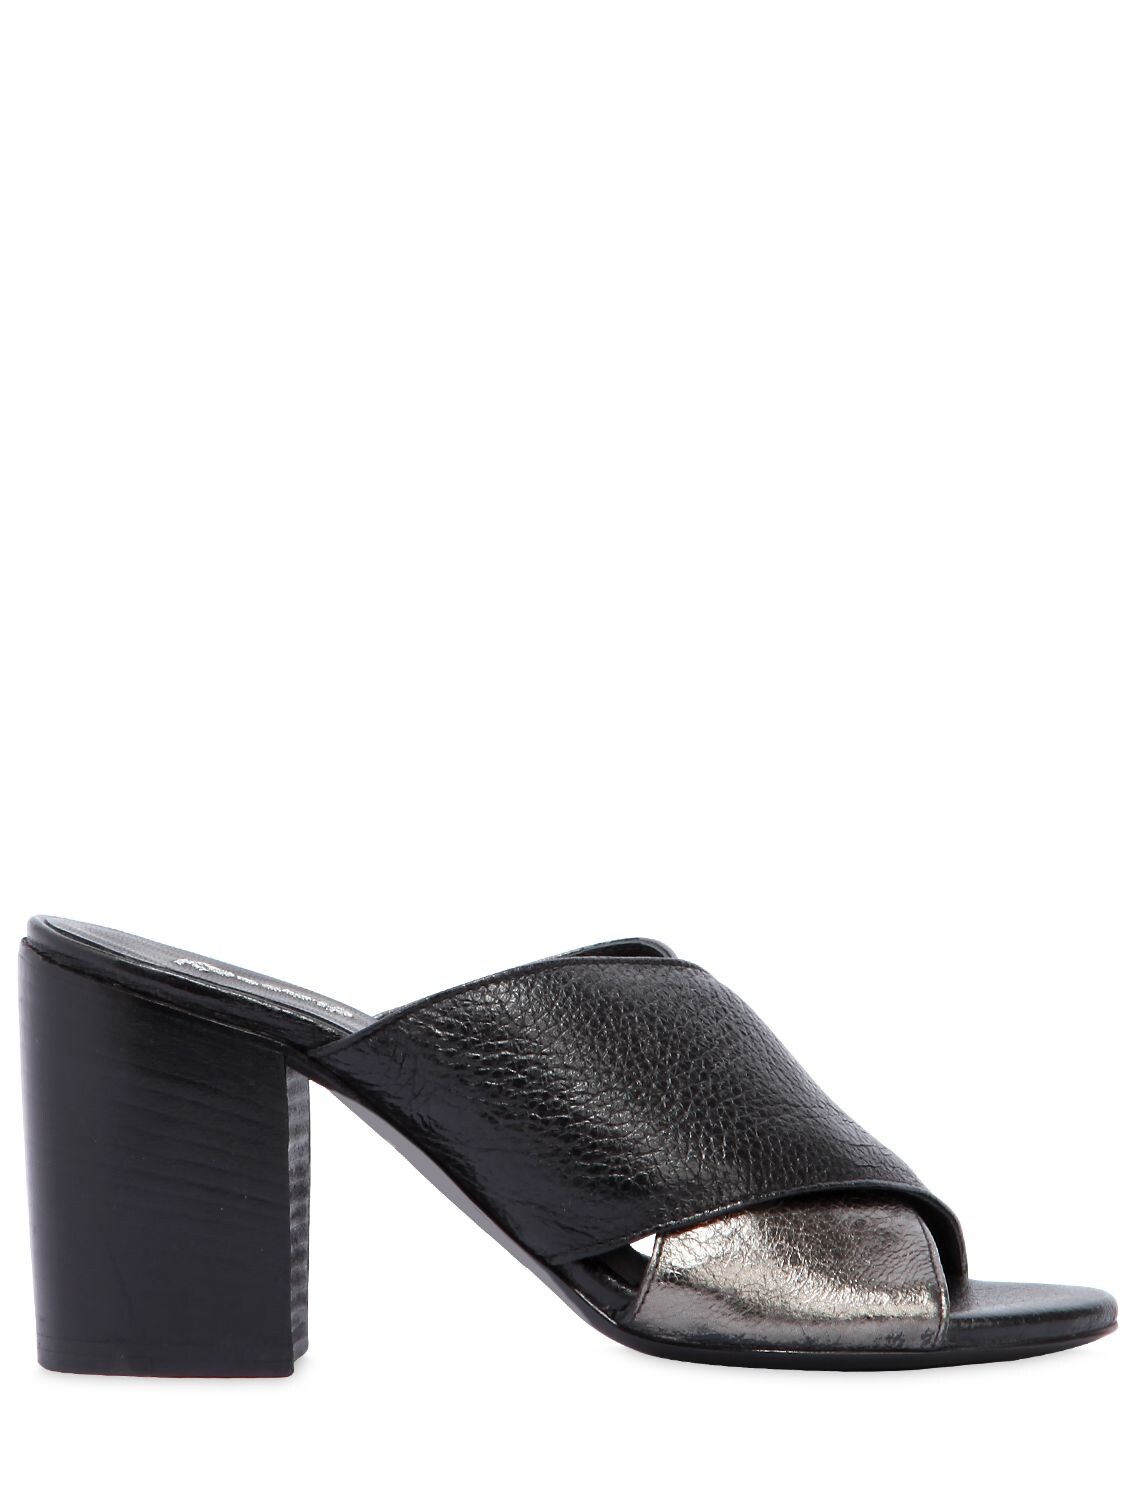 Rocco P 70mm Leather Mules In Black/silver